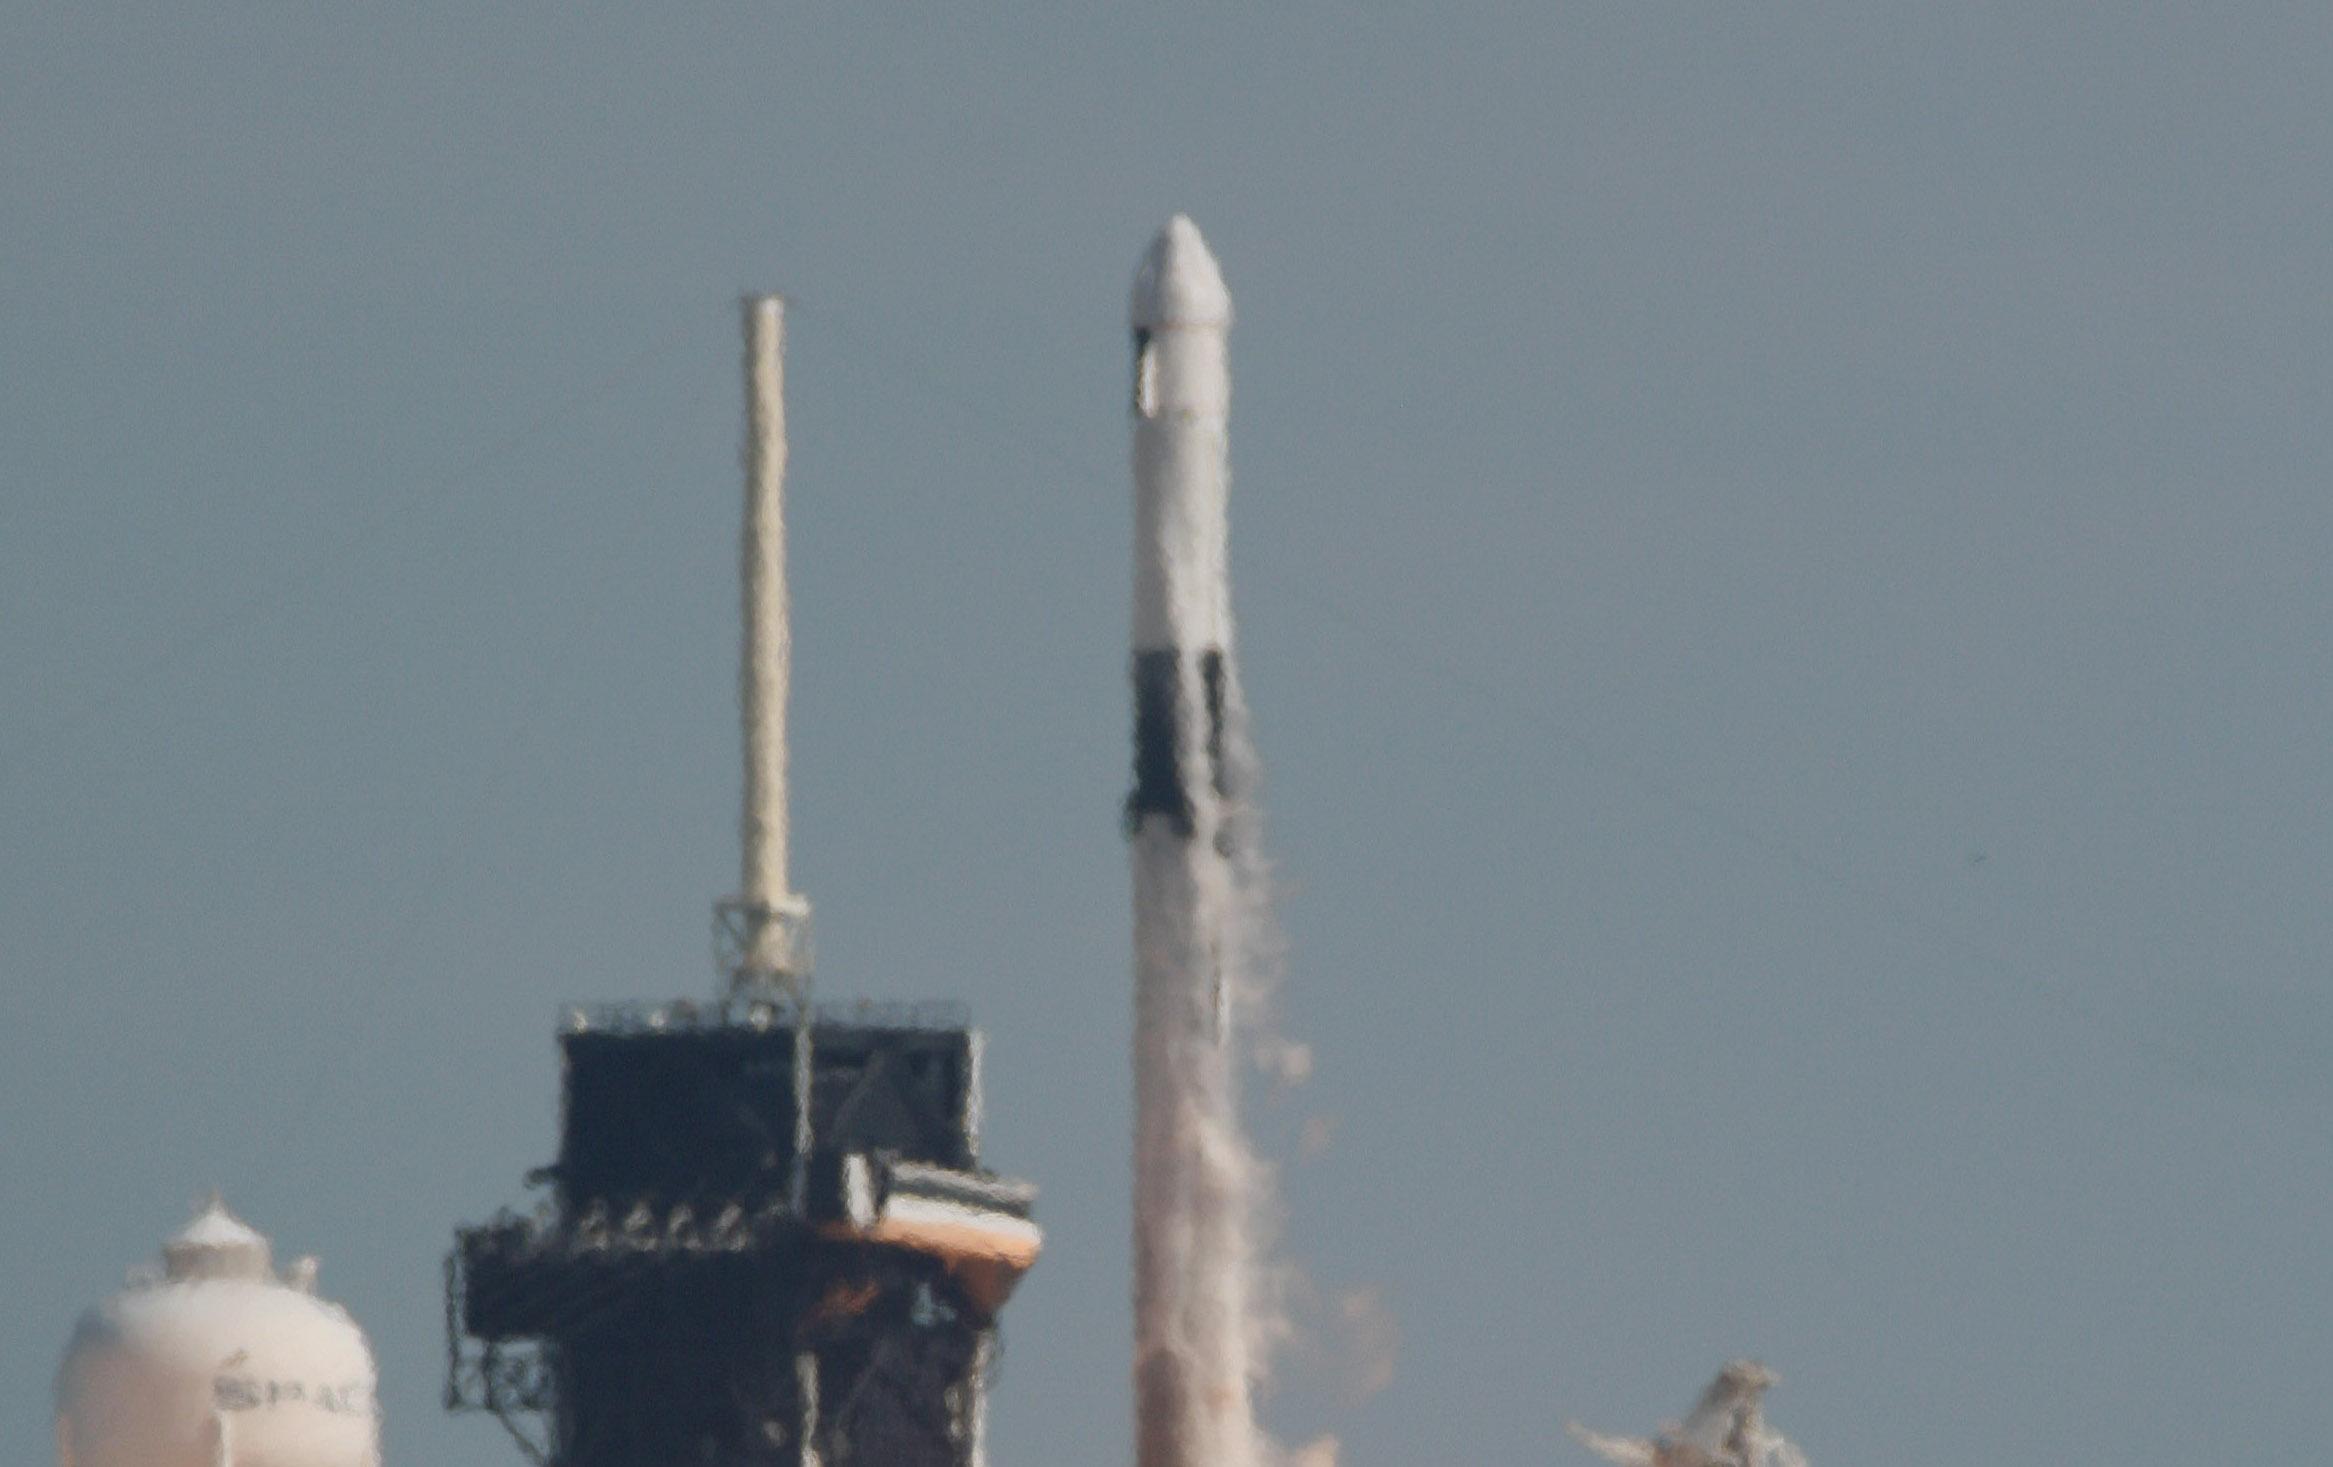  SpaceX Falcon 9 rocket lifting off fromm Cape Canaveral Dec. 6.